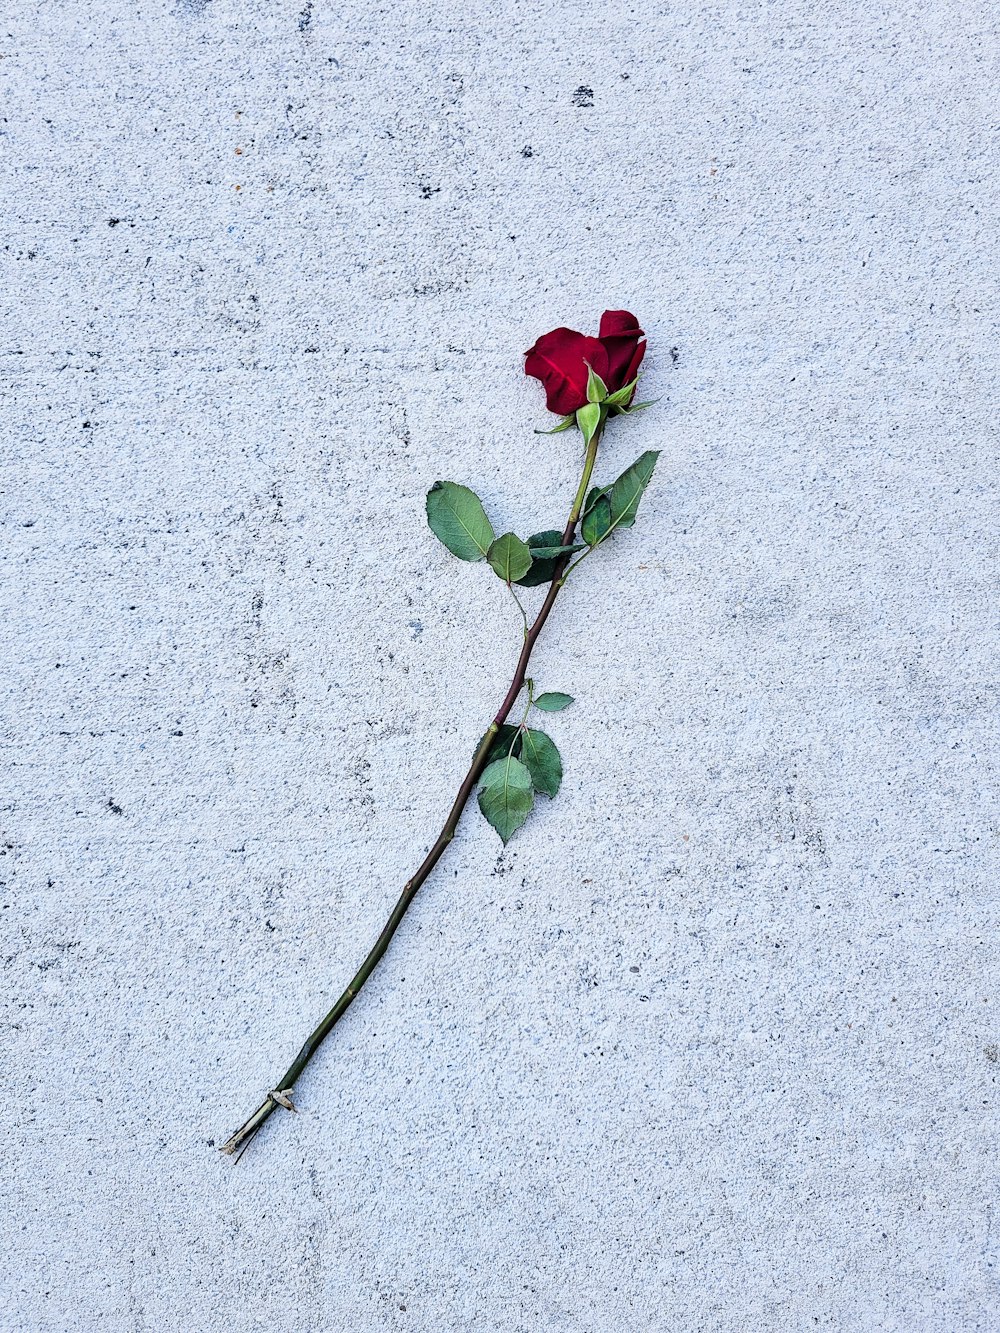 a single rose that is laying on the ground